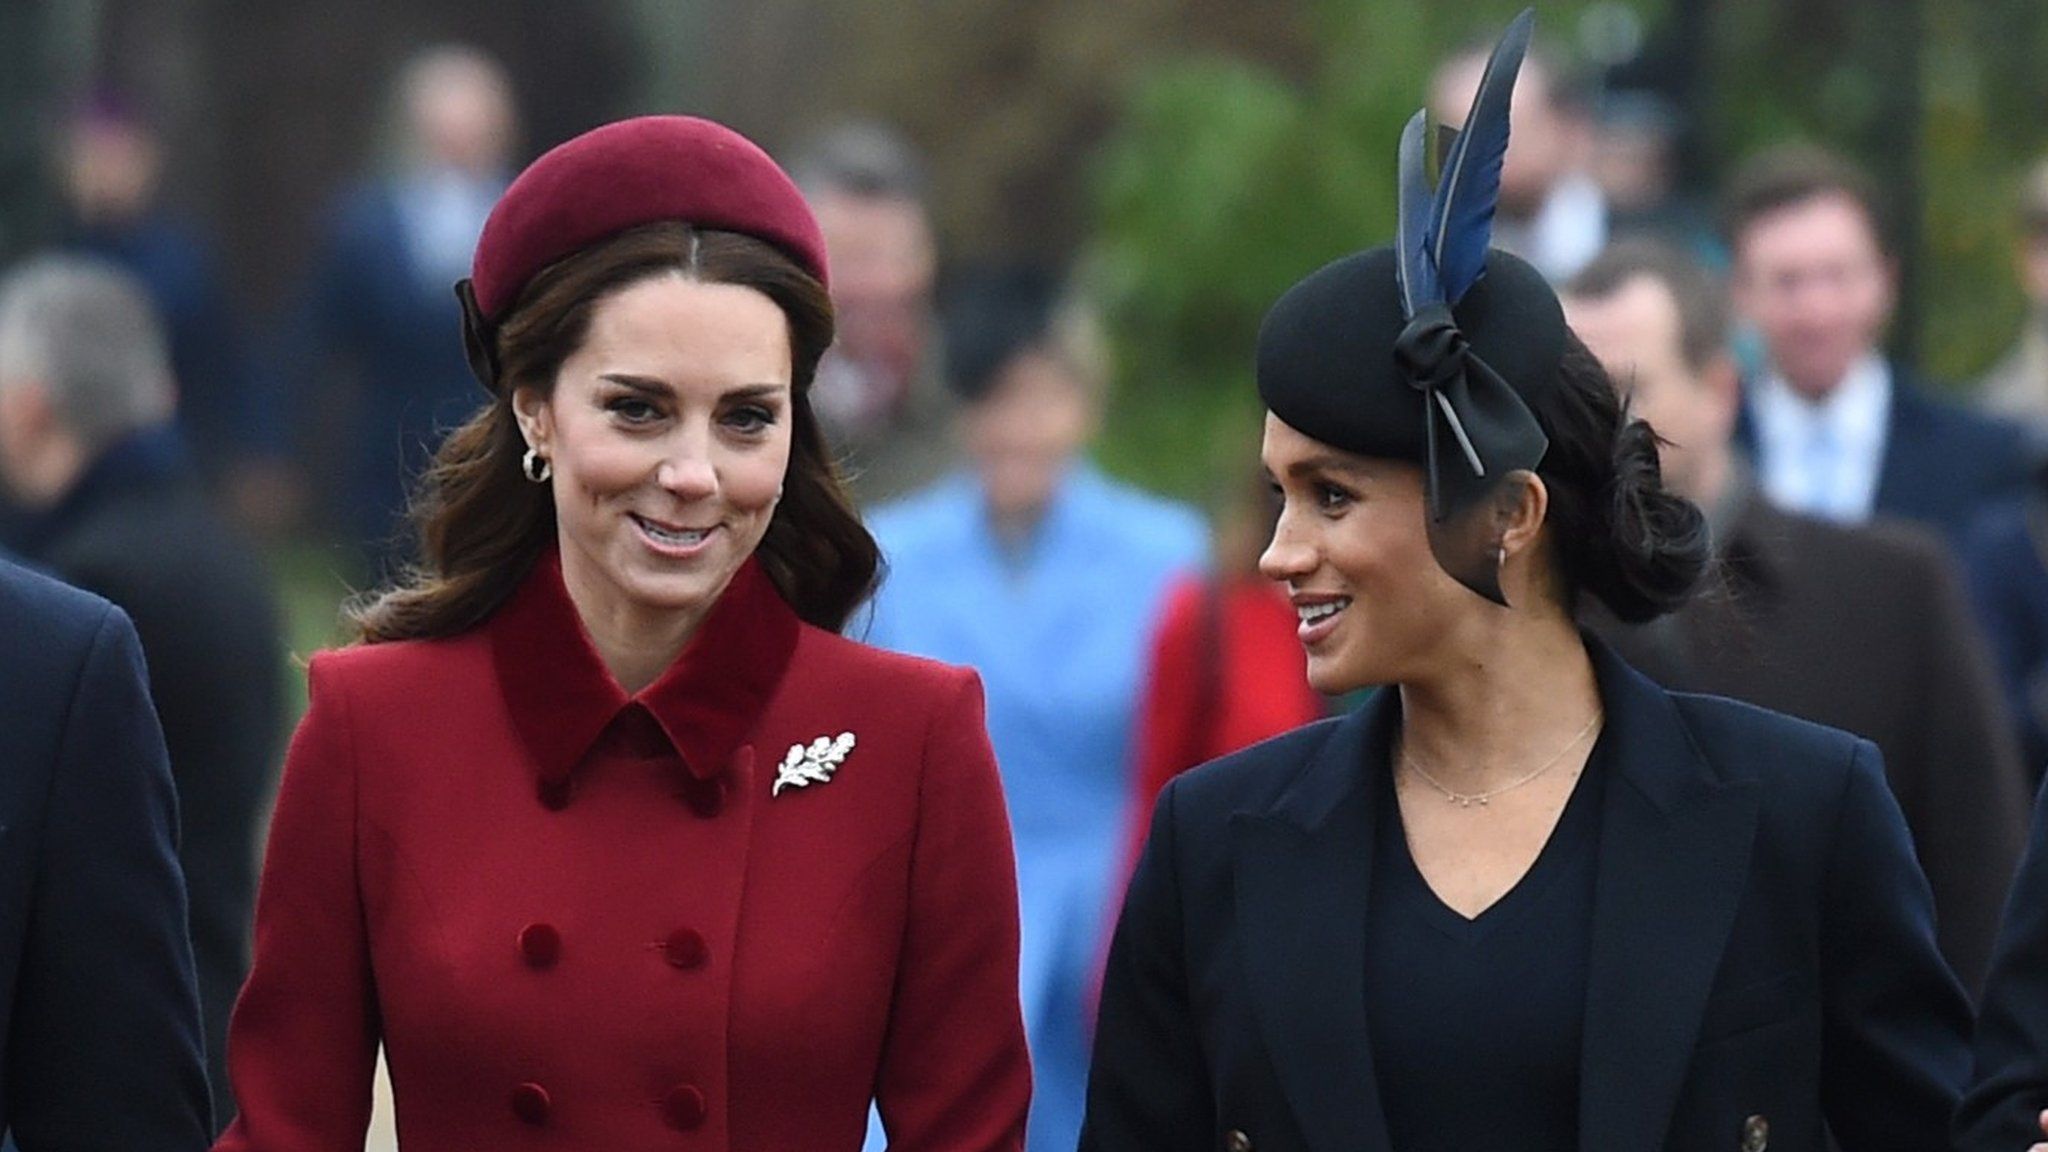 The Duchess of Cambridge and the Duchess of Sussex arrive at the morning service